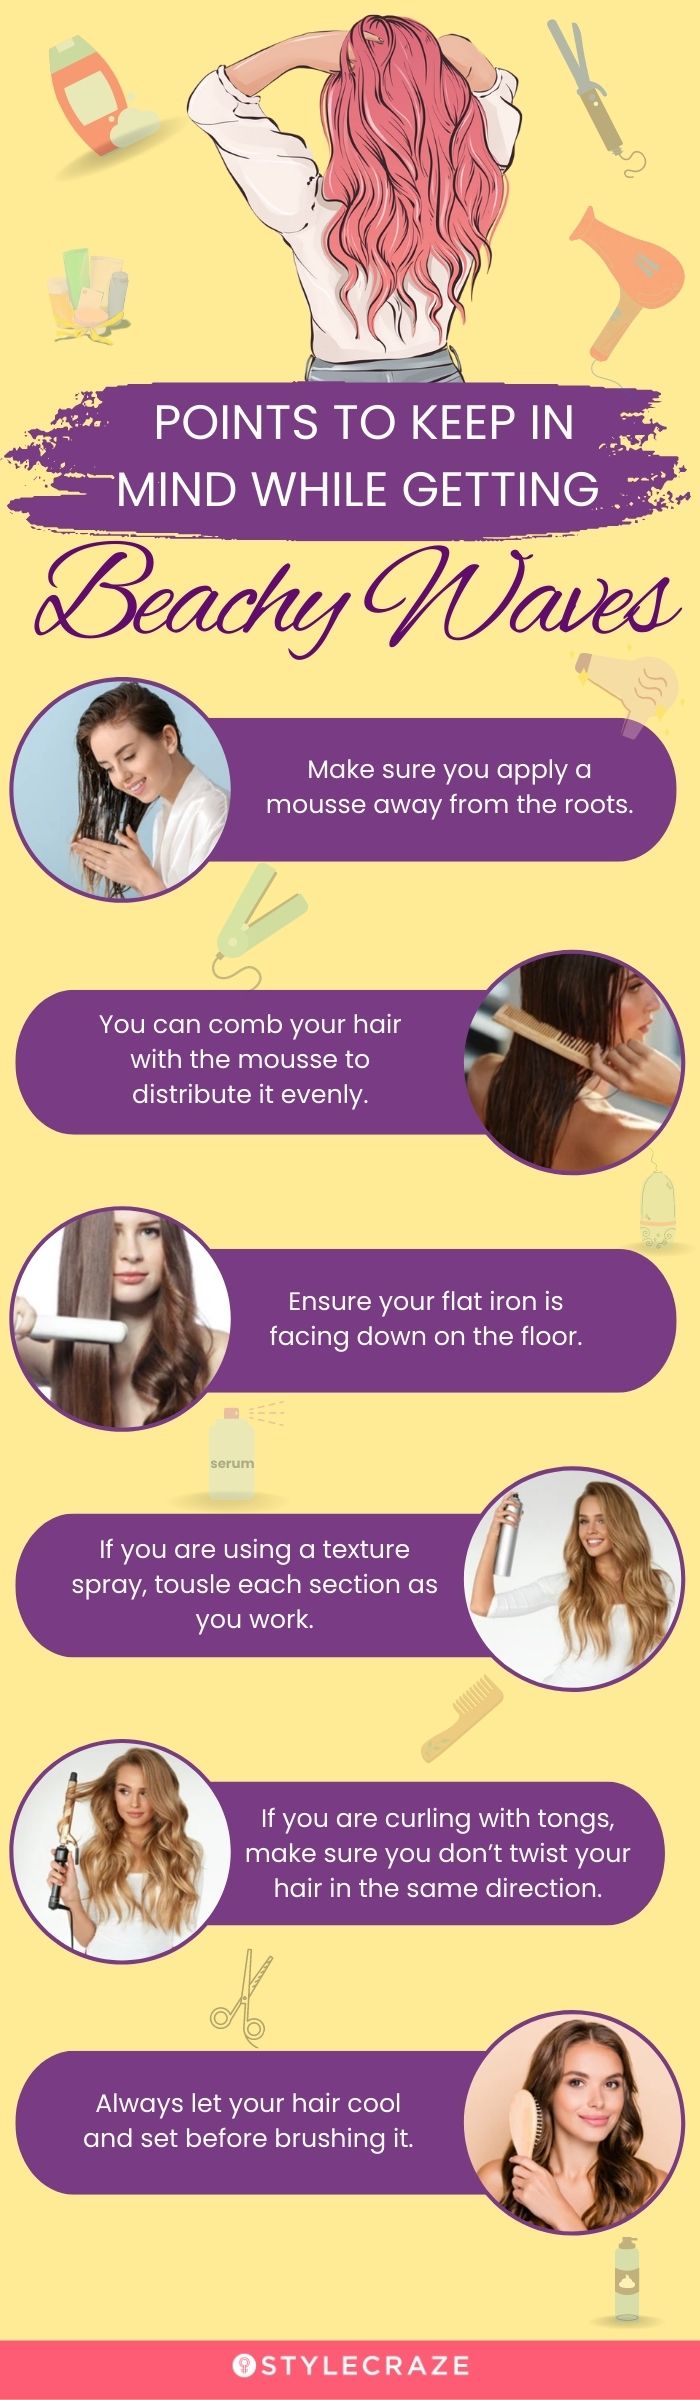 points to keep in mind while getting beachy waves (infographic)